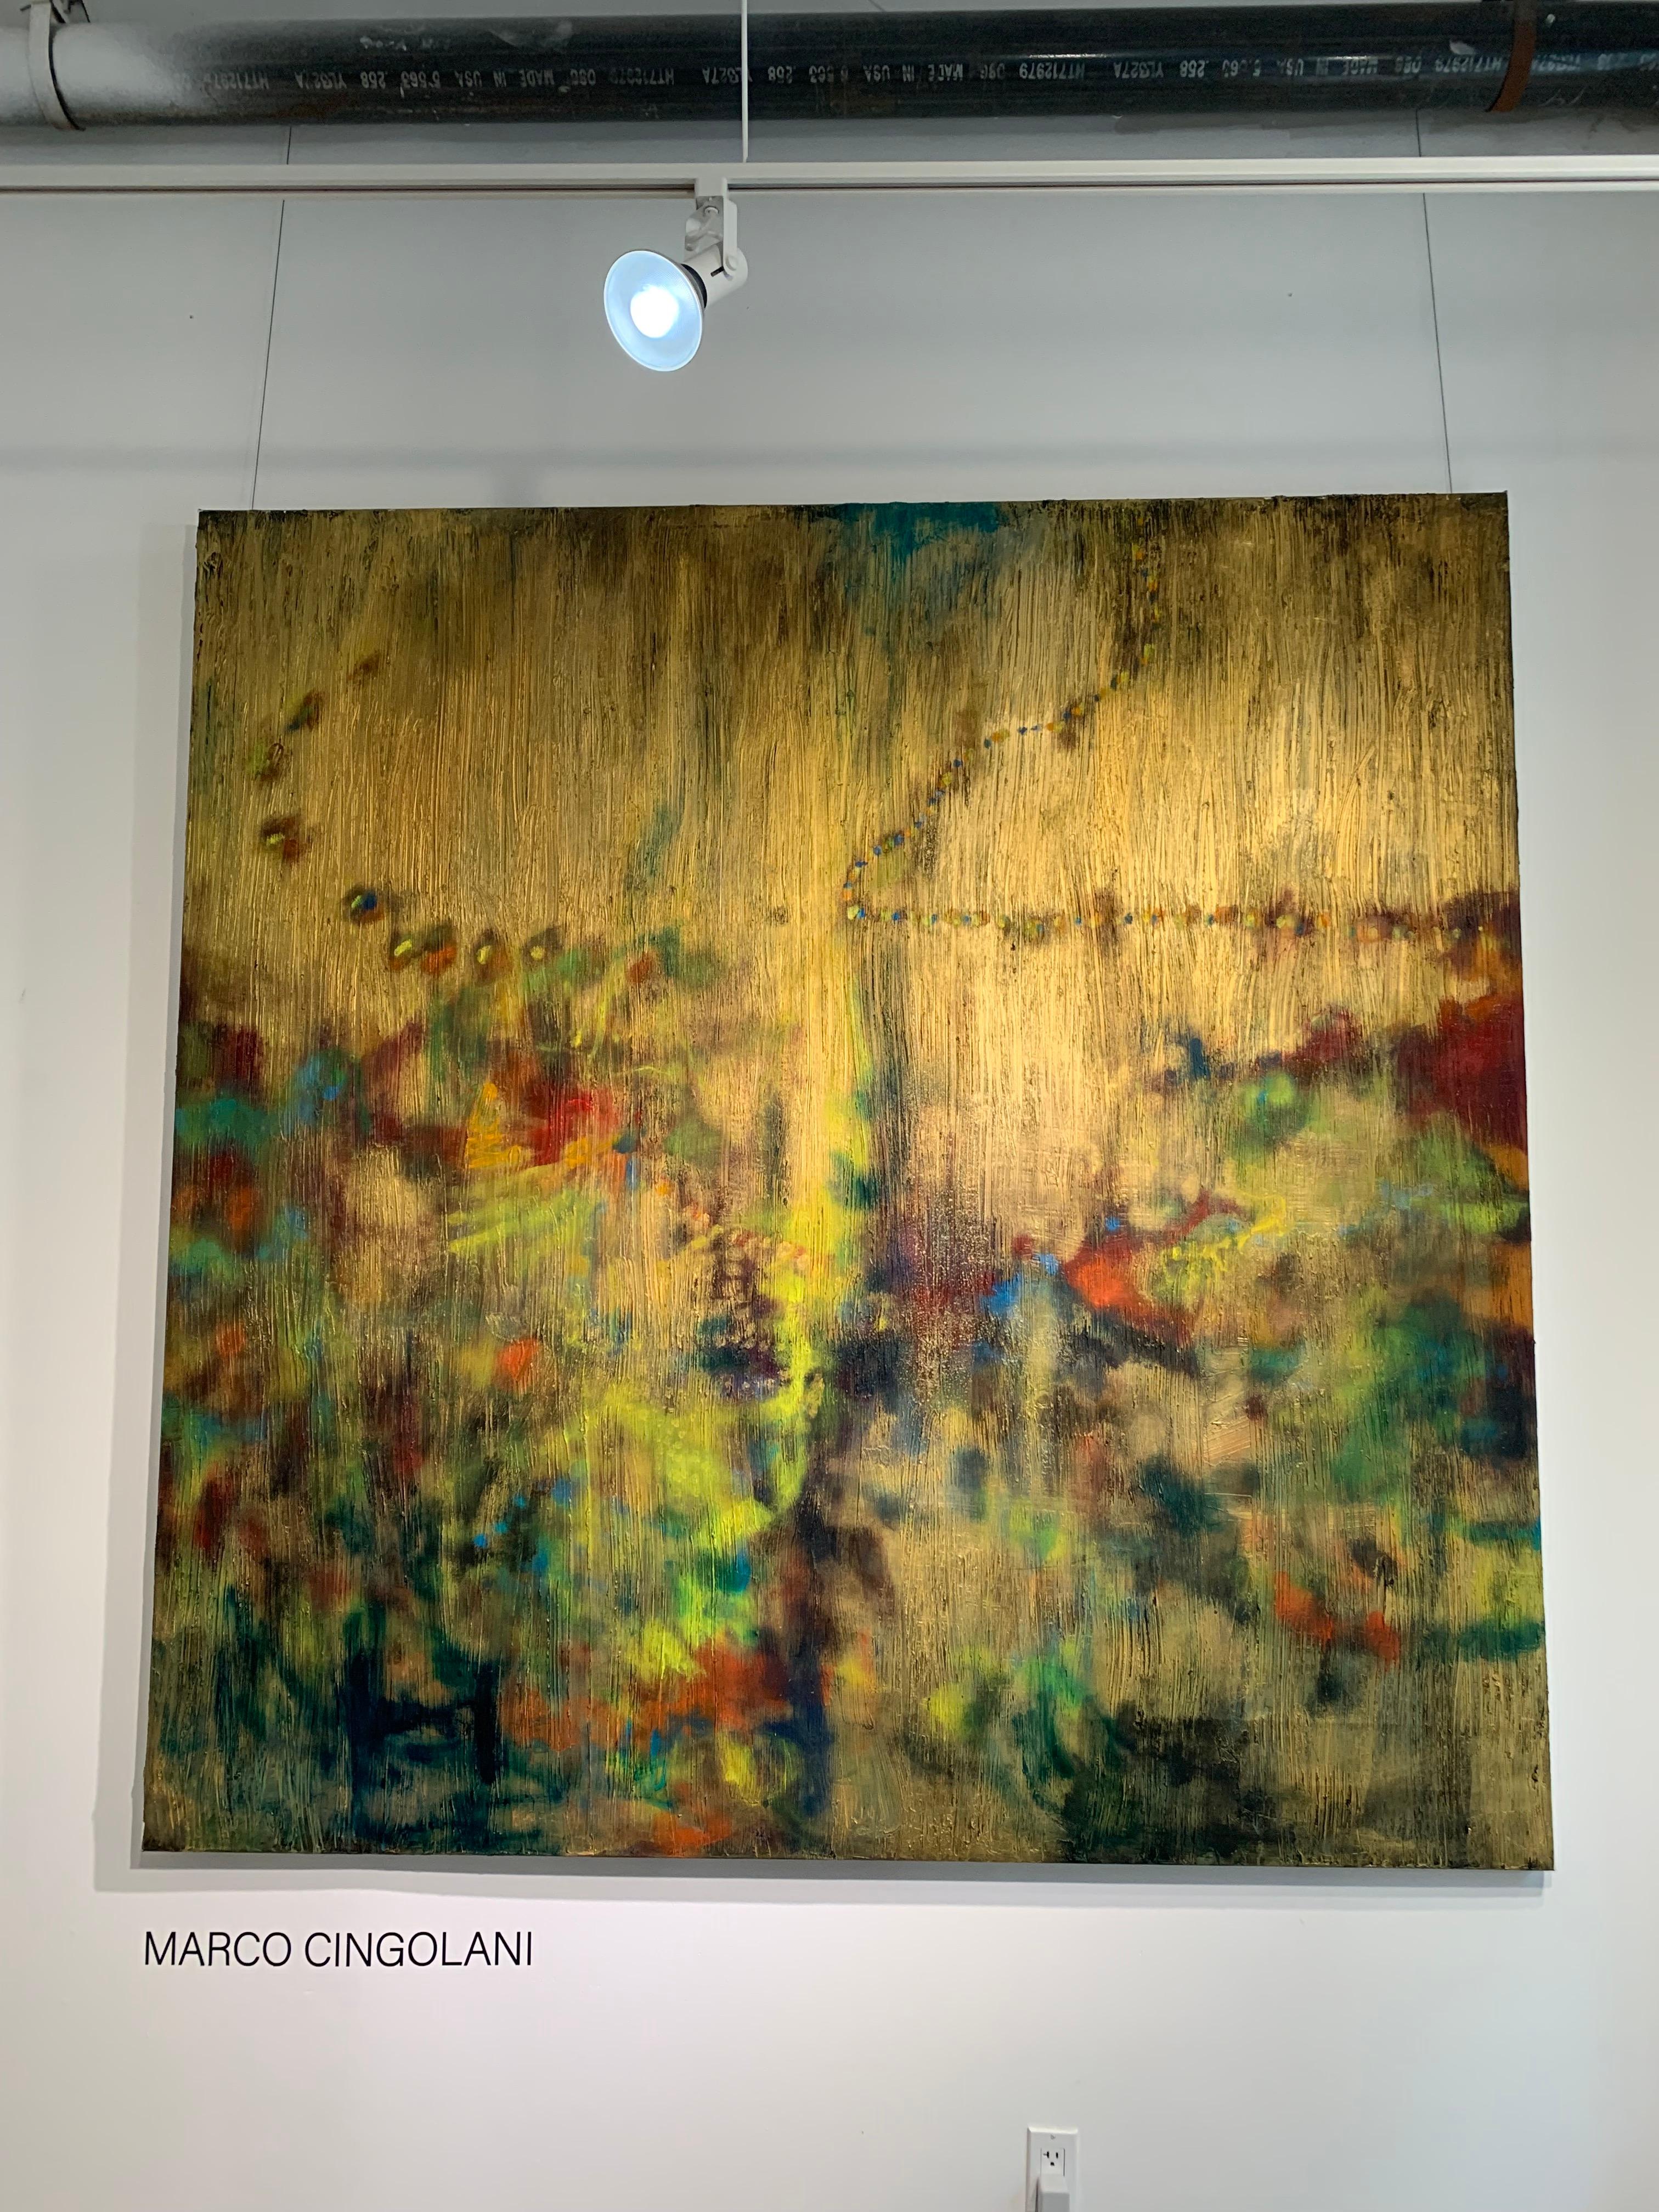 An abstract oil painting inspired by nature, forests and landscapes, by Italian Master painter Marc Cingolani. The paintings has a marked surface texture with Gold paint layered over the landscape.
 